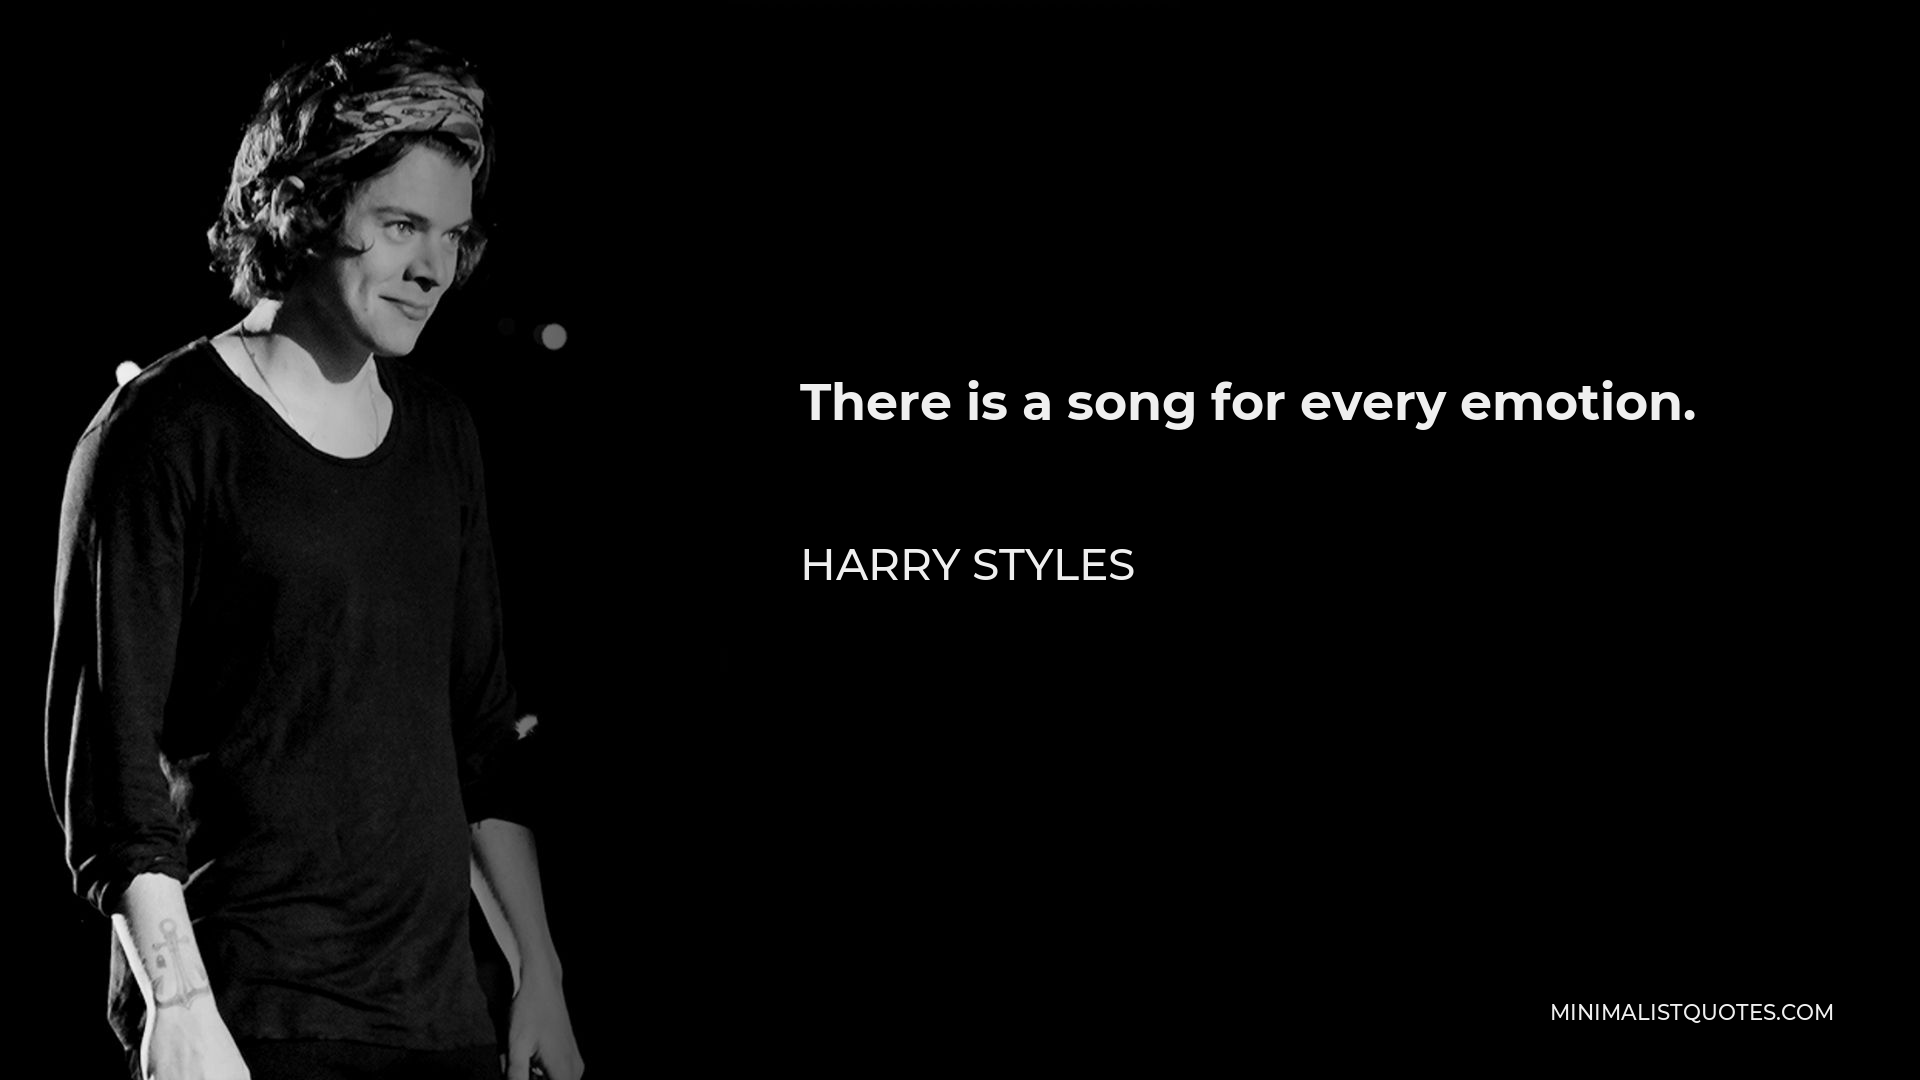 Harry Styles Quote - There is a song for every emotion.